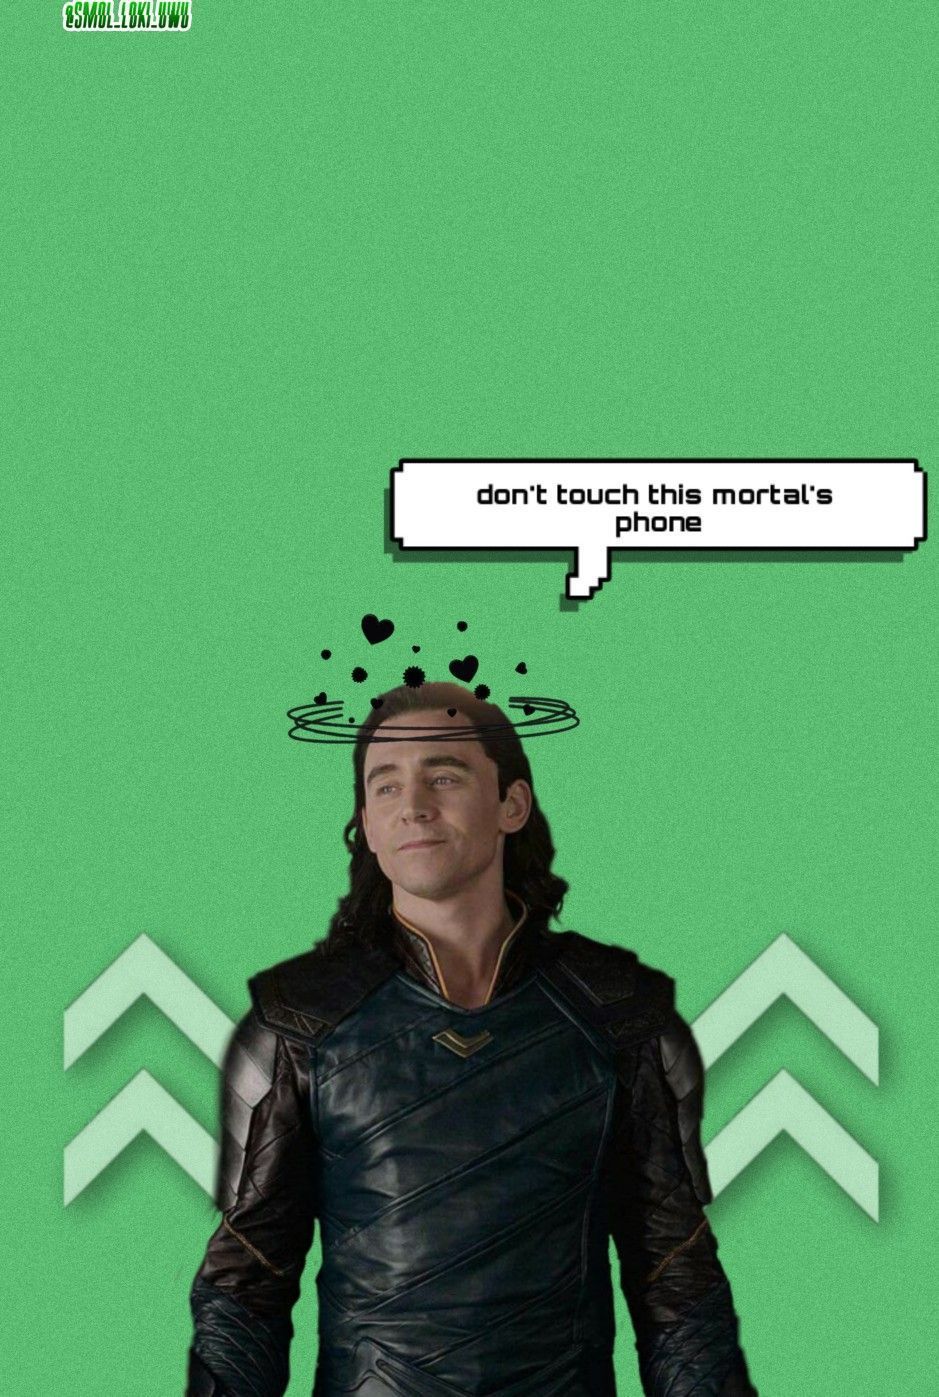 A green background with a picture of loki from the avengers movies on it - Loki